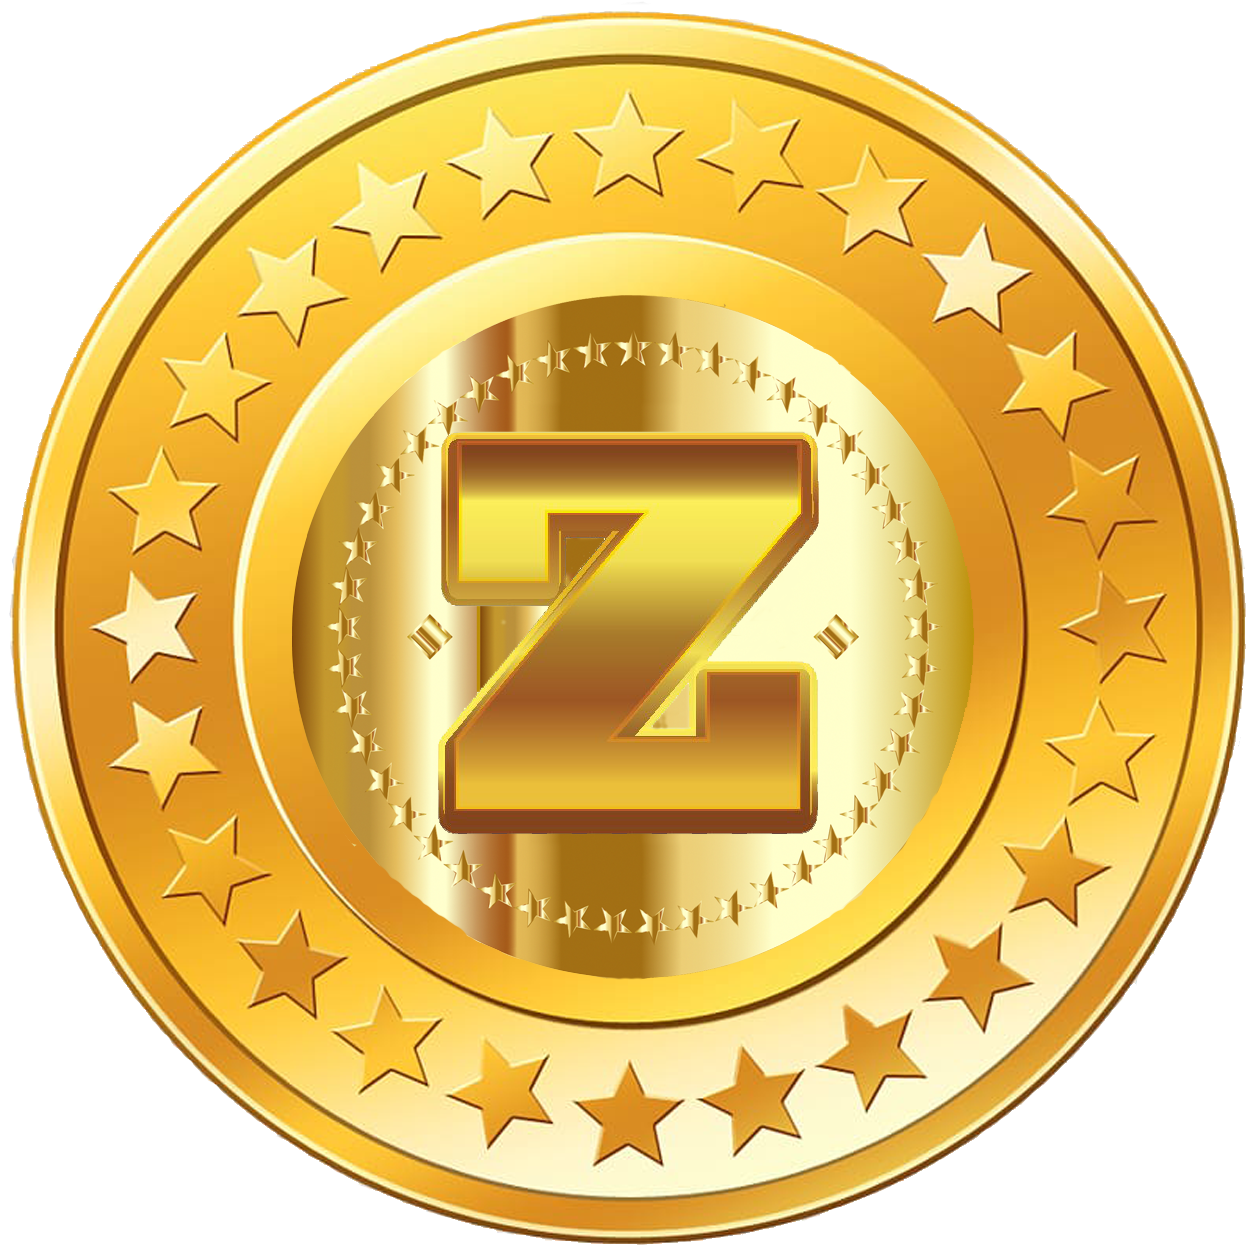  Pictures gallery of Zinkod, Zingicoin, Zin, Зинкоин, токен, Zinkod is an open book, in which everyone can make his own chapter.